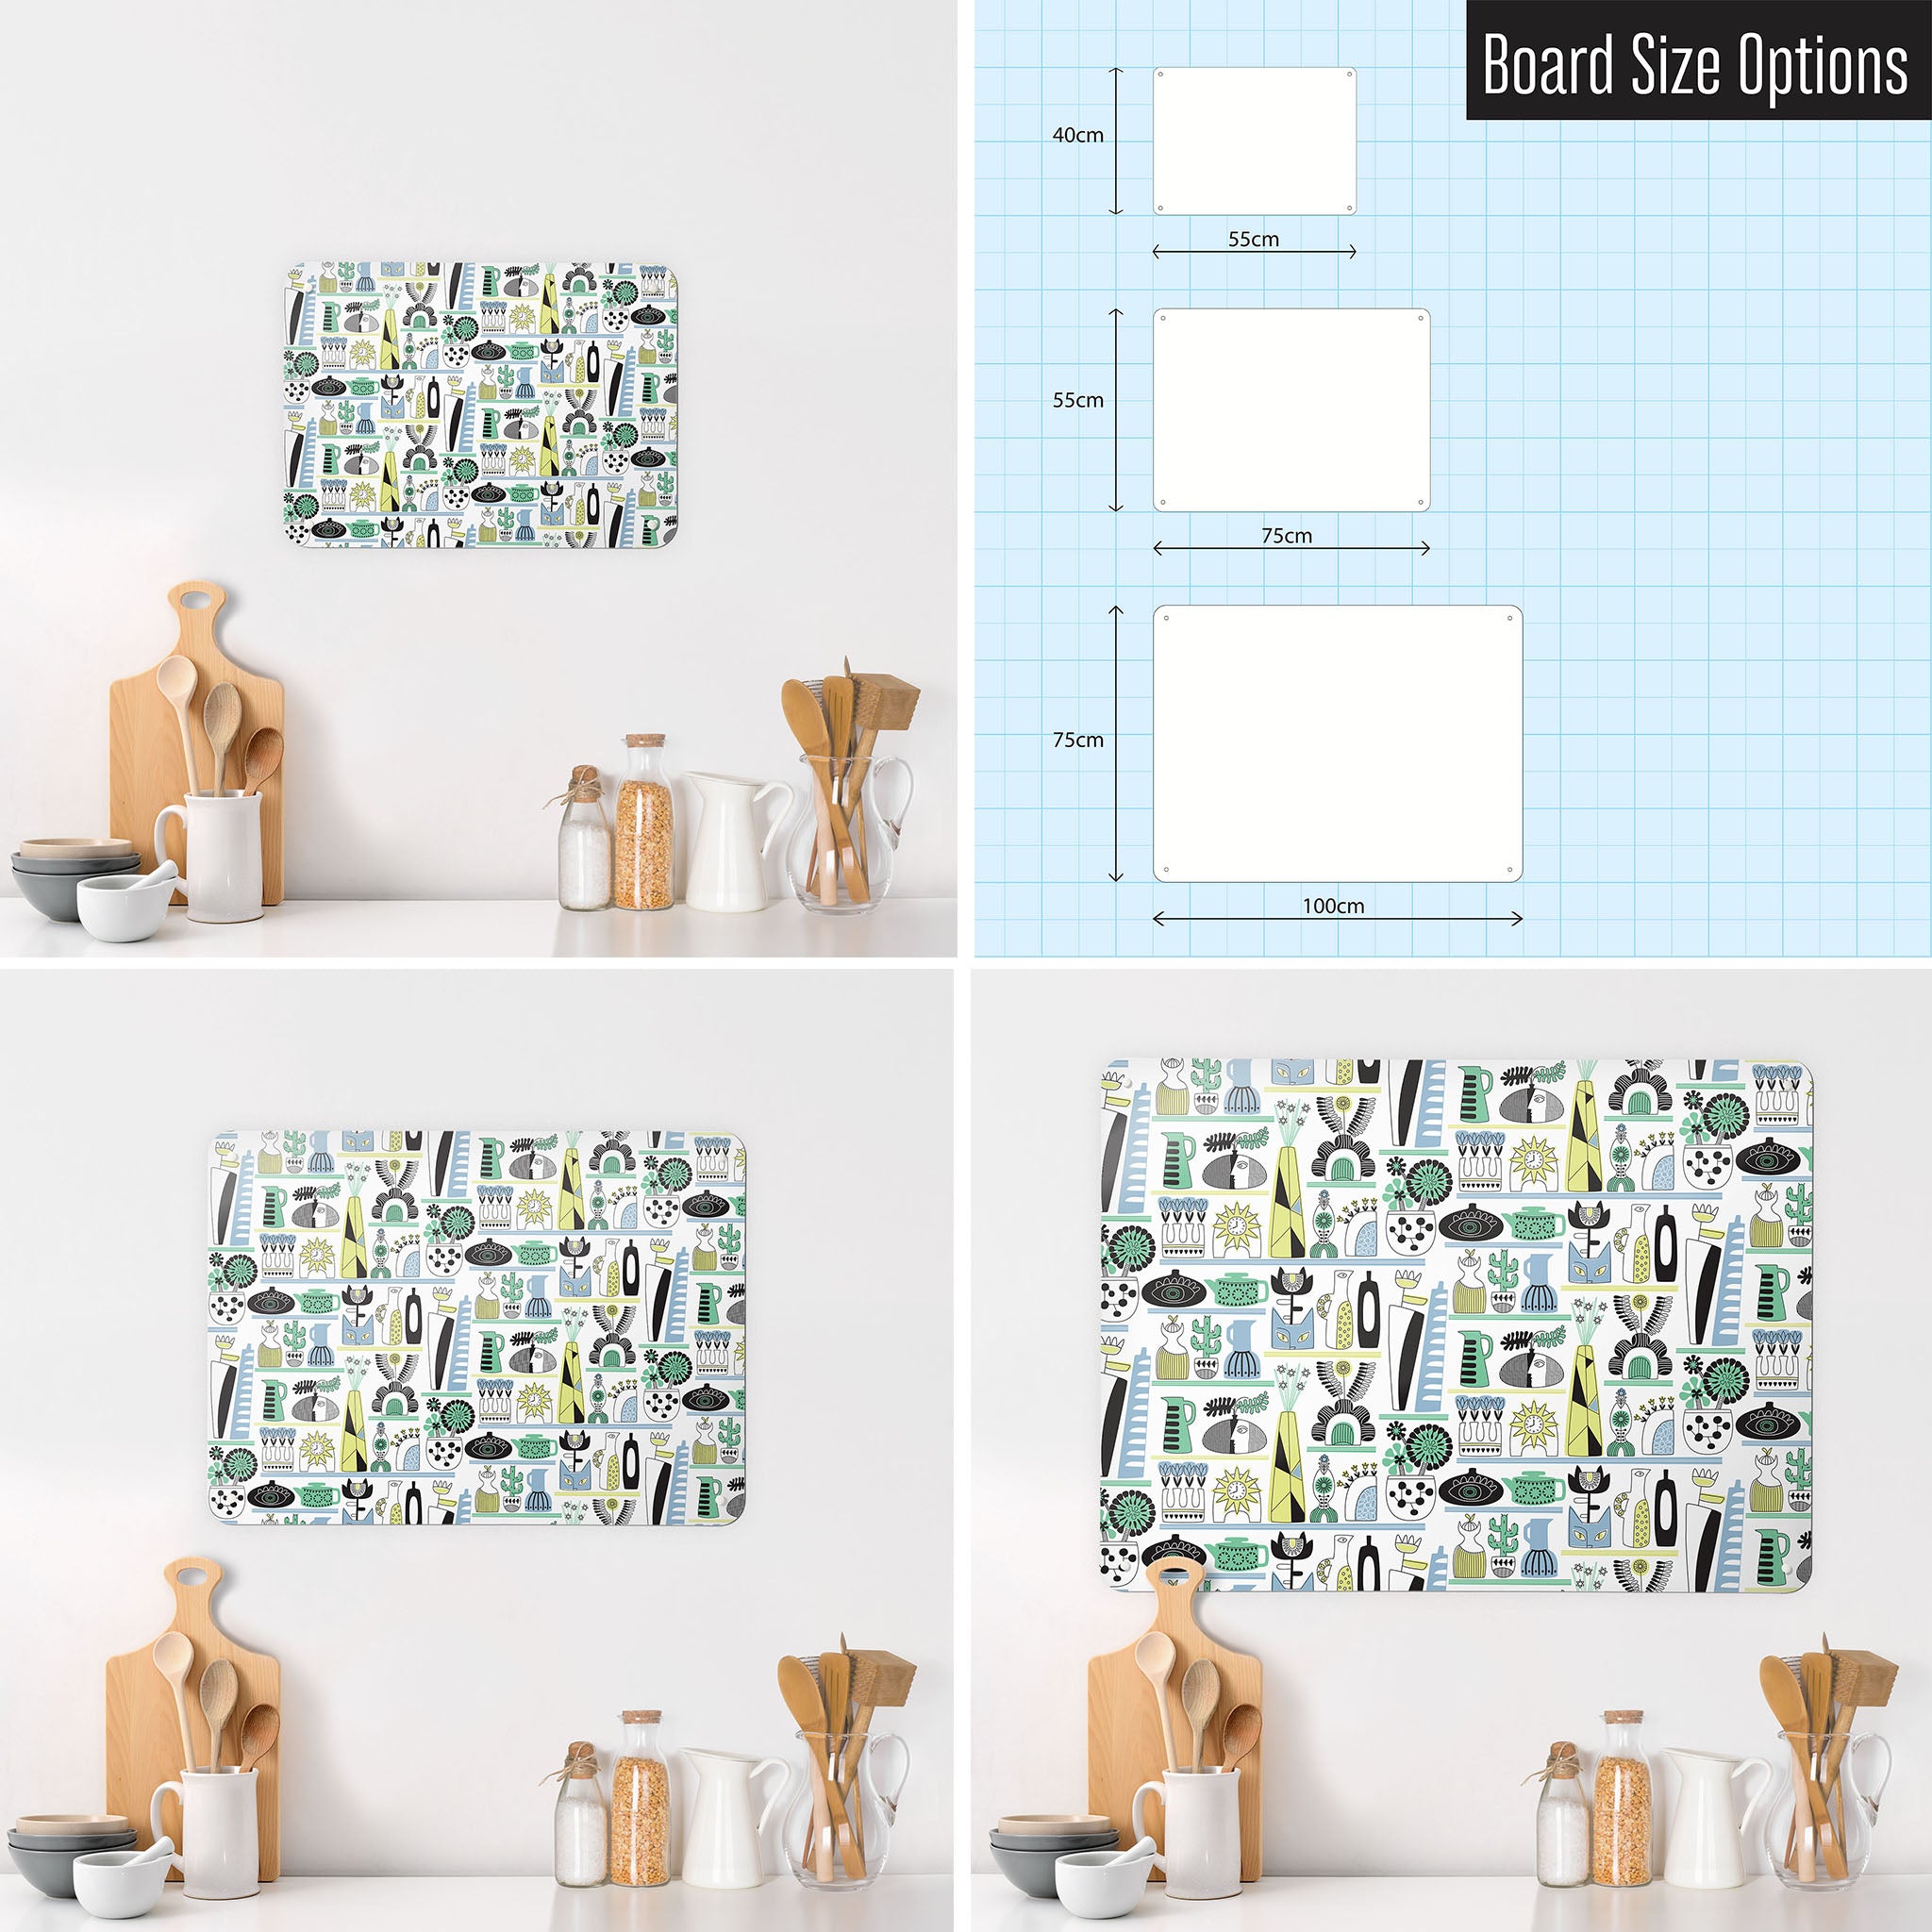 Three photographs of a workspace interior and a diagram to show size comparisons of a shelf life cool tones magnetic notice board